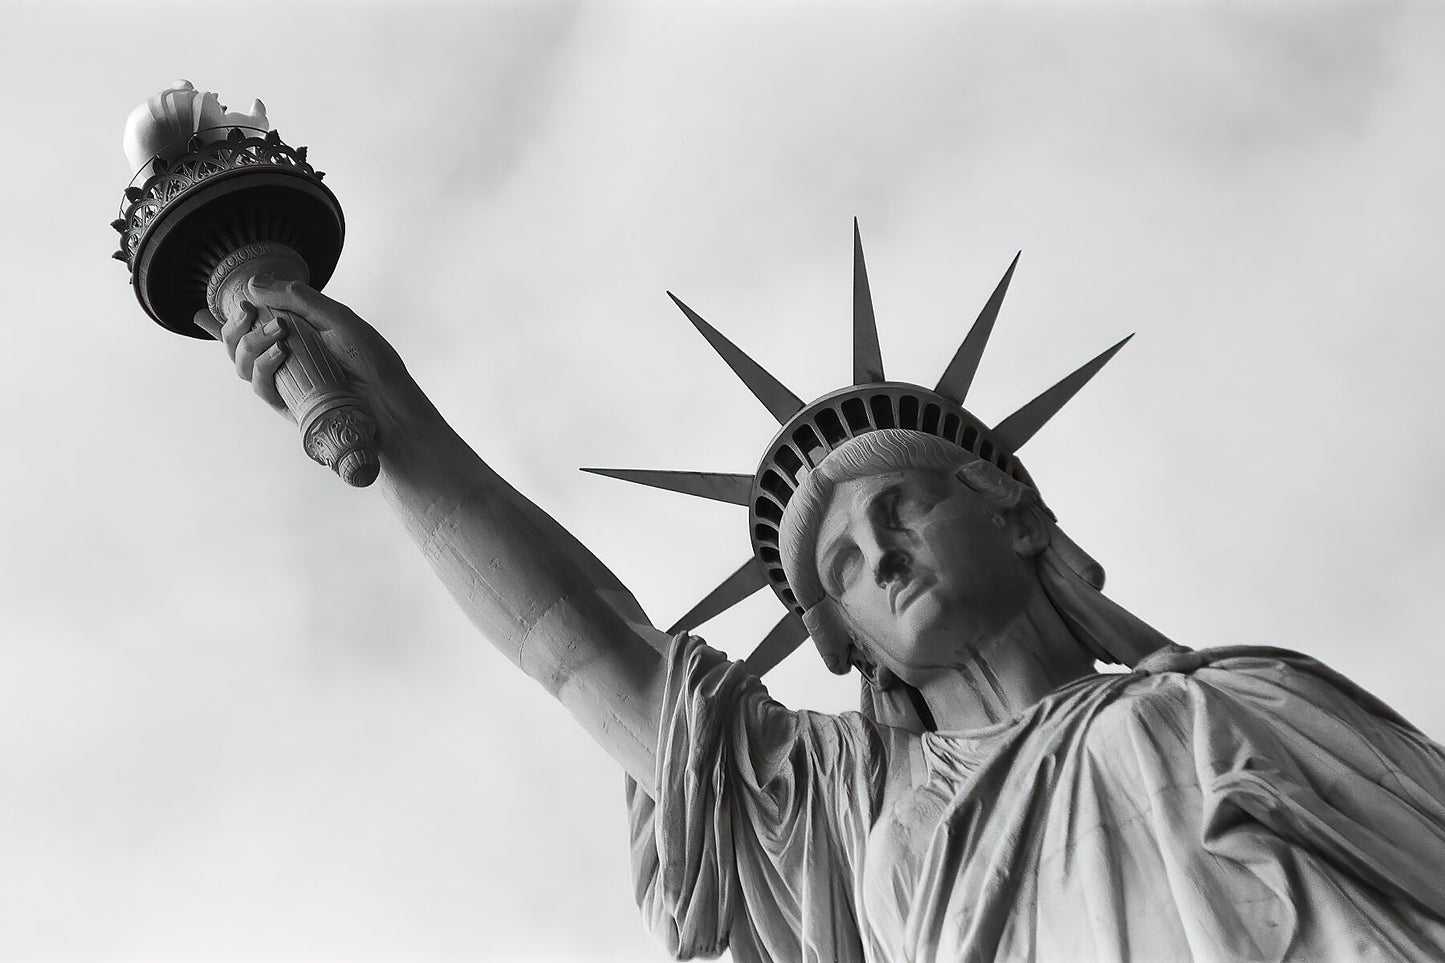 Black and White portrait of Lady Liberty